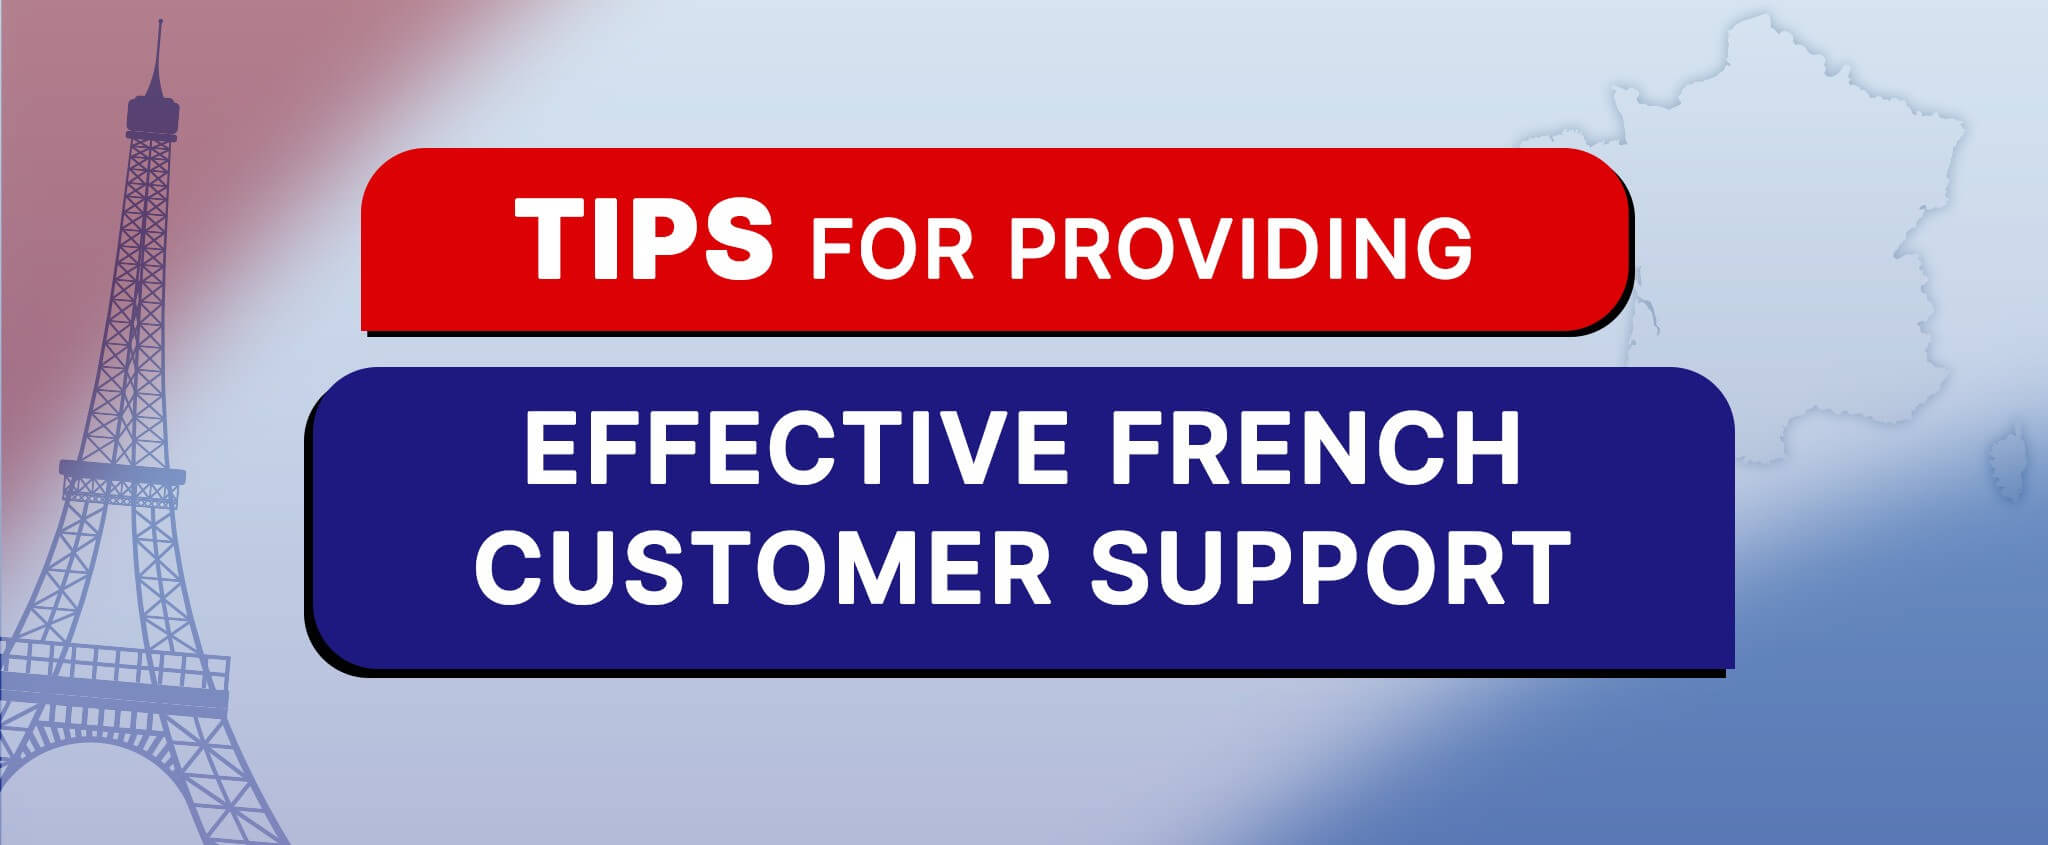 Tips for Providing Effective French Customer Support